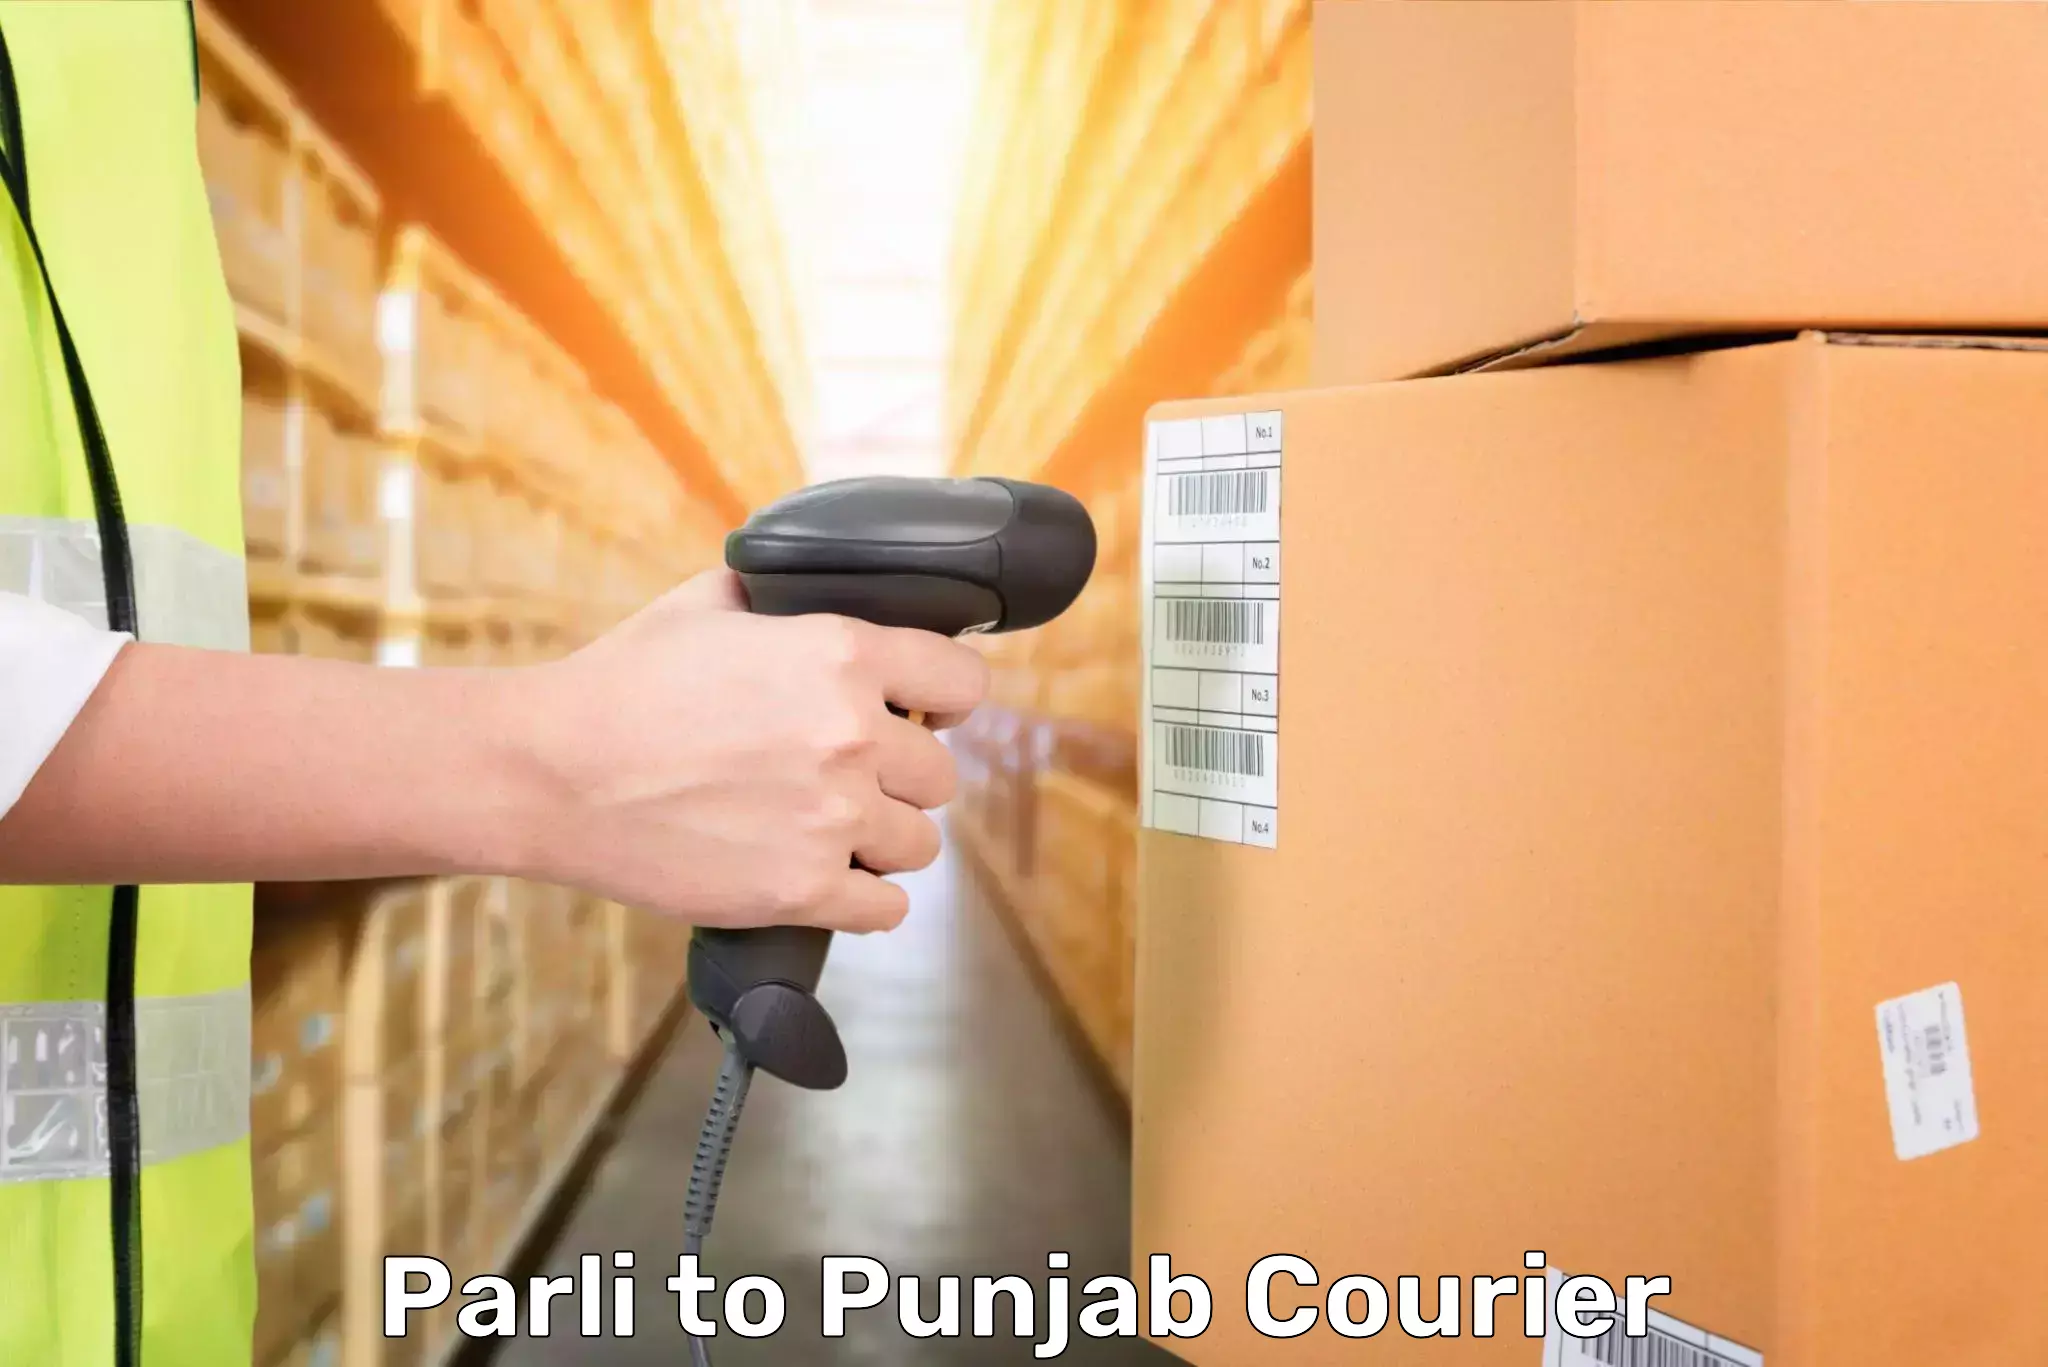 Personal effects shipping in Parli to Jalandhar